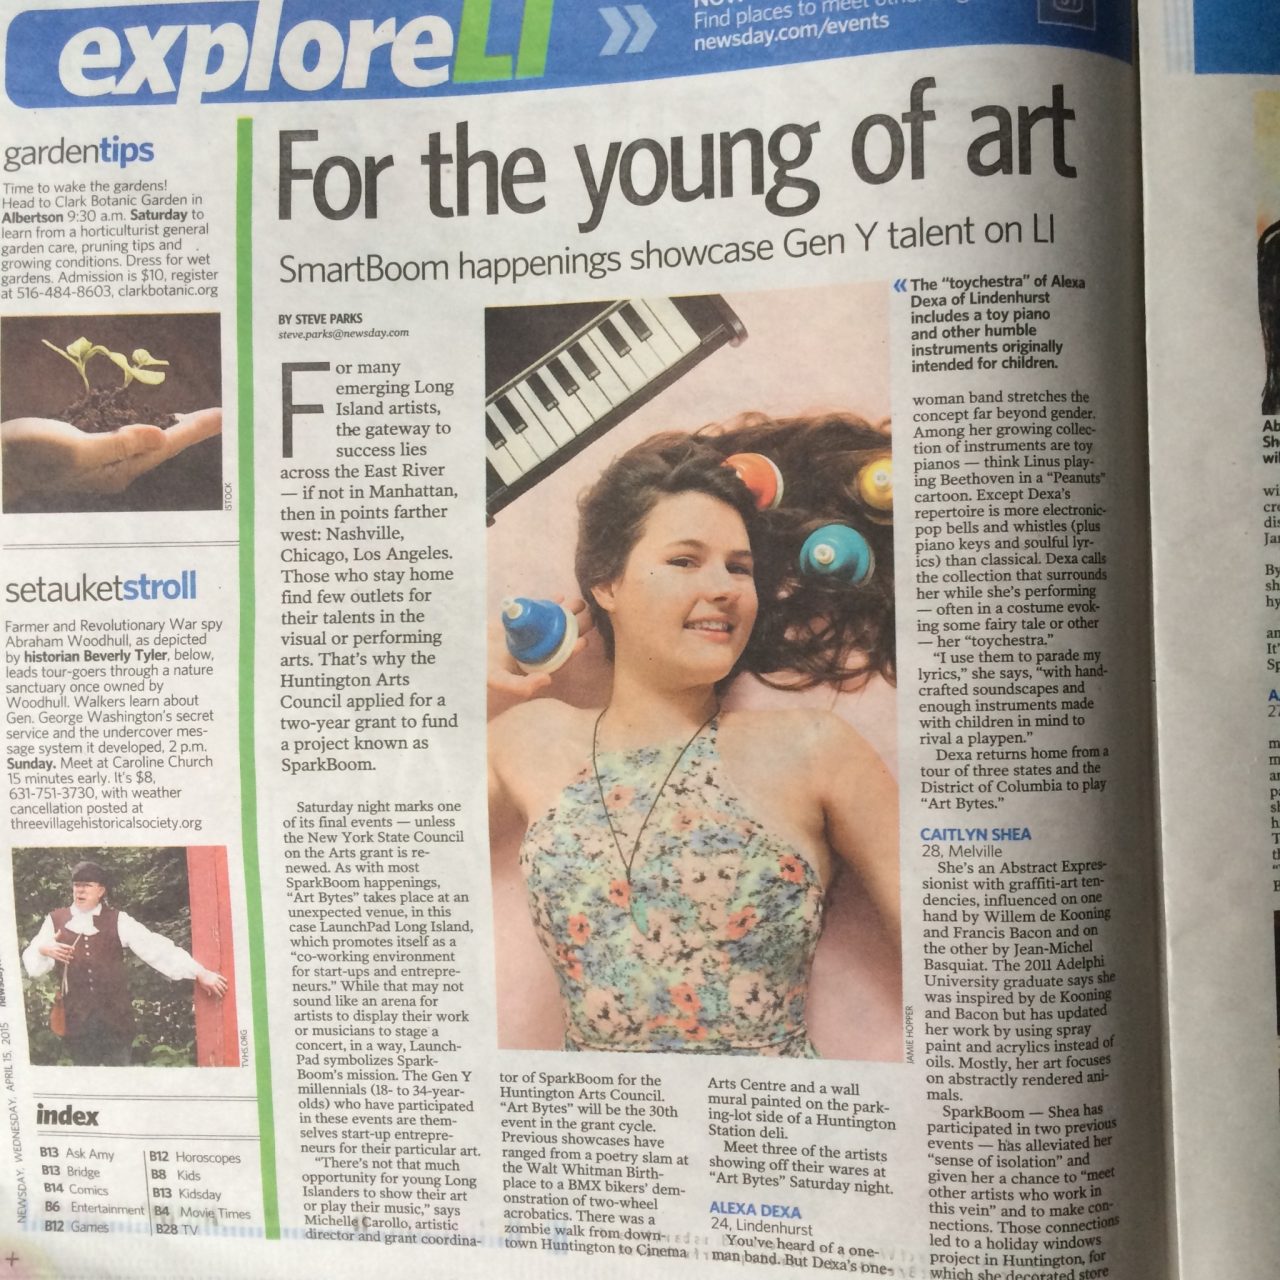 A Newsday article featuring Alexa Dexa and their toychestra. The article title reads "For the young of Art. SmartBoom happenings showcase Gen Y talent on LI".  